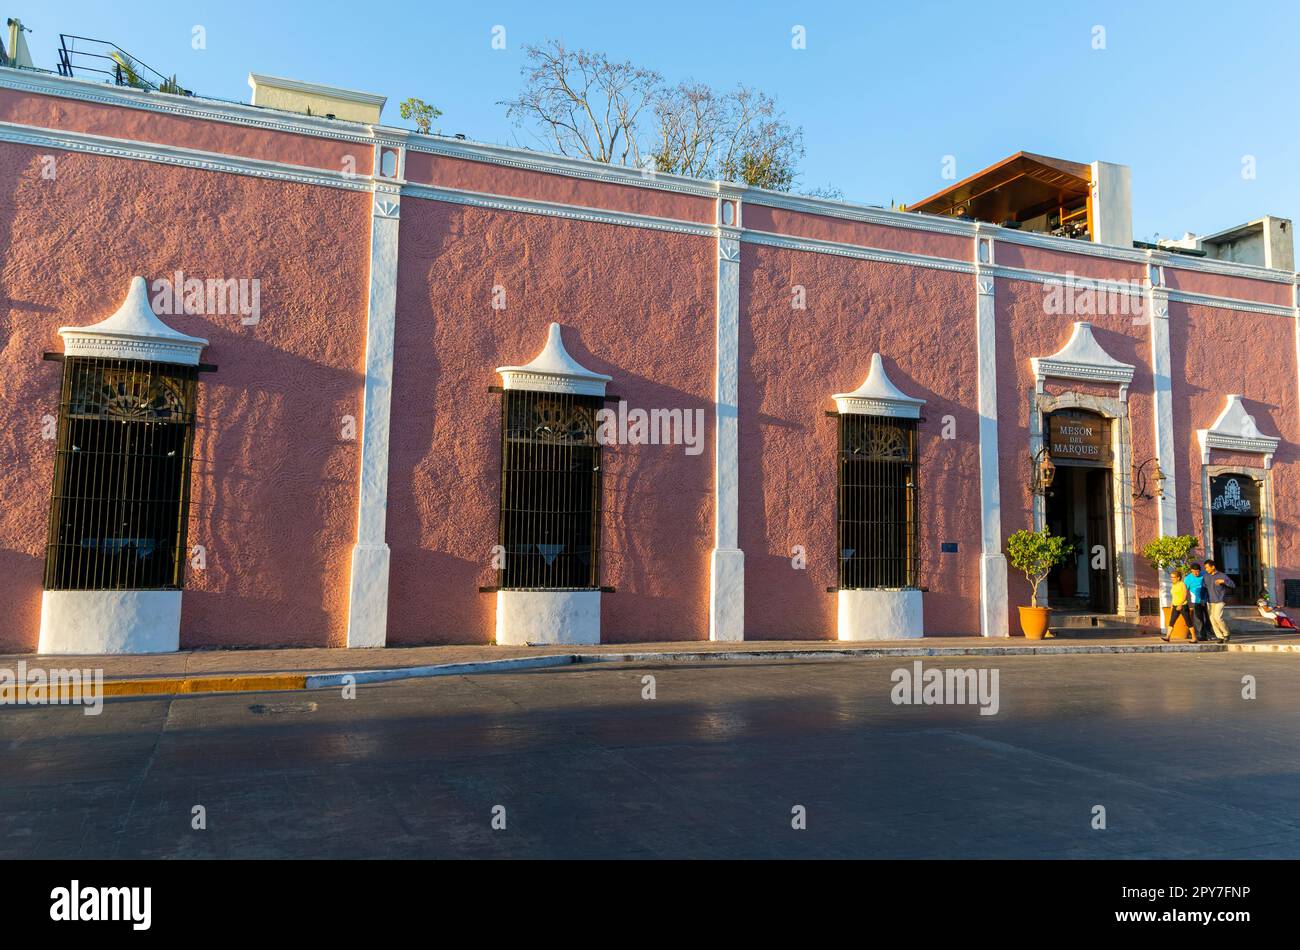 Meson del Marques restaurant in old Spanish colonial building, Vallodolid, Yucatan, Mexico Stock Photo